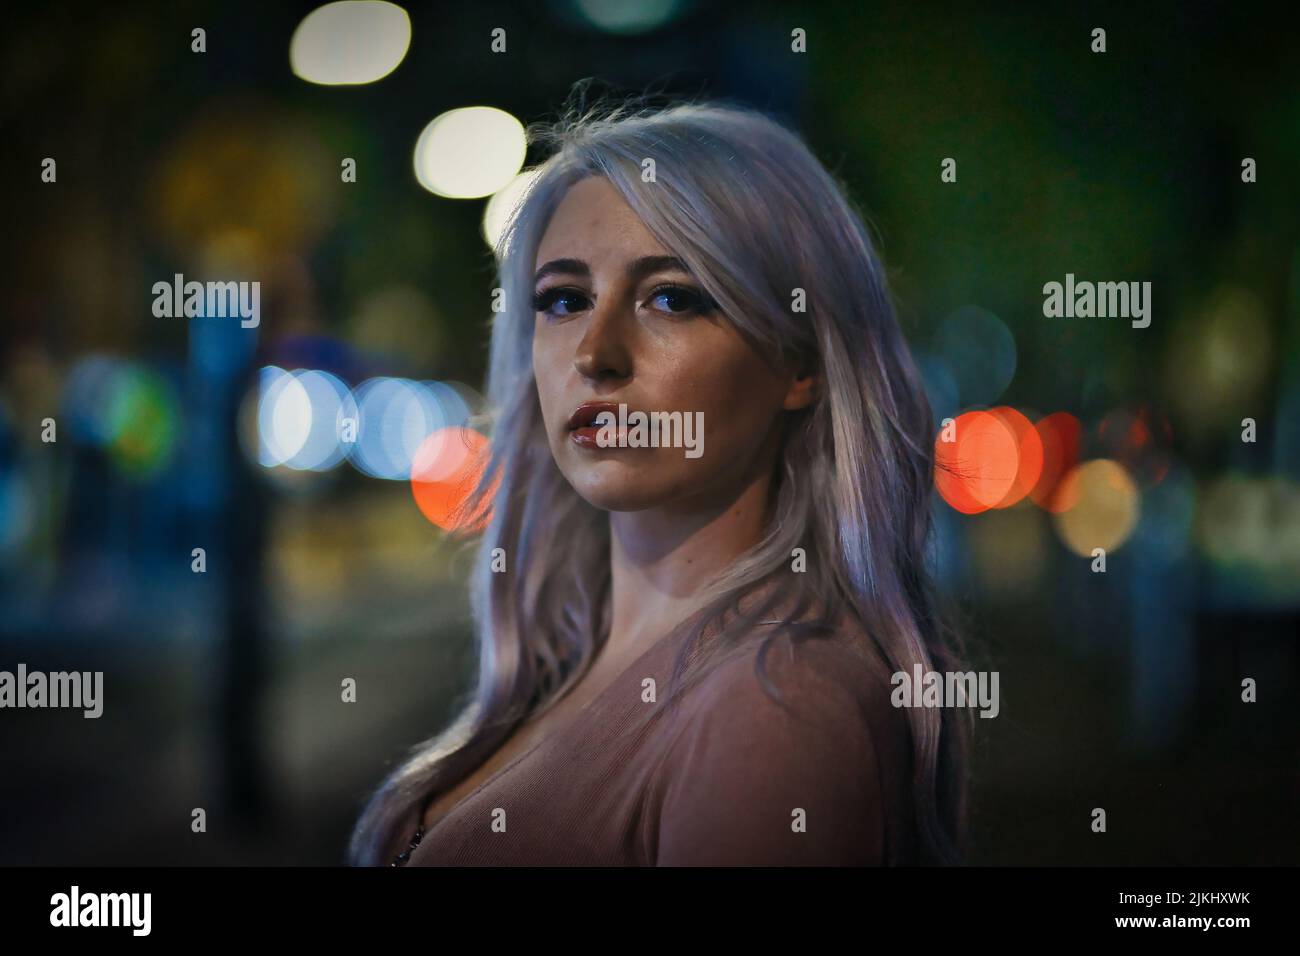 A closeup portrait of an attractive woman in the streets at night with a blurry bokeh background Stock Photo